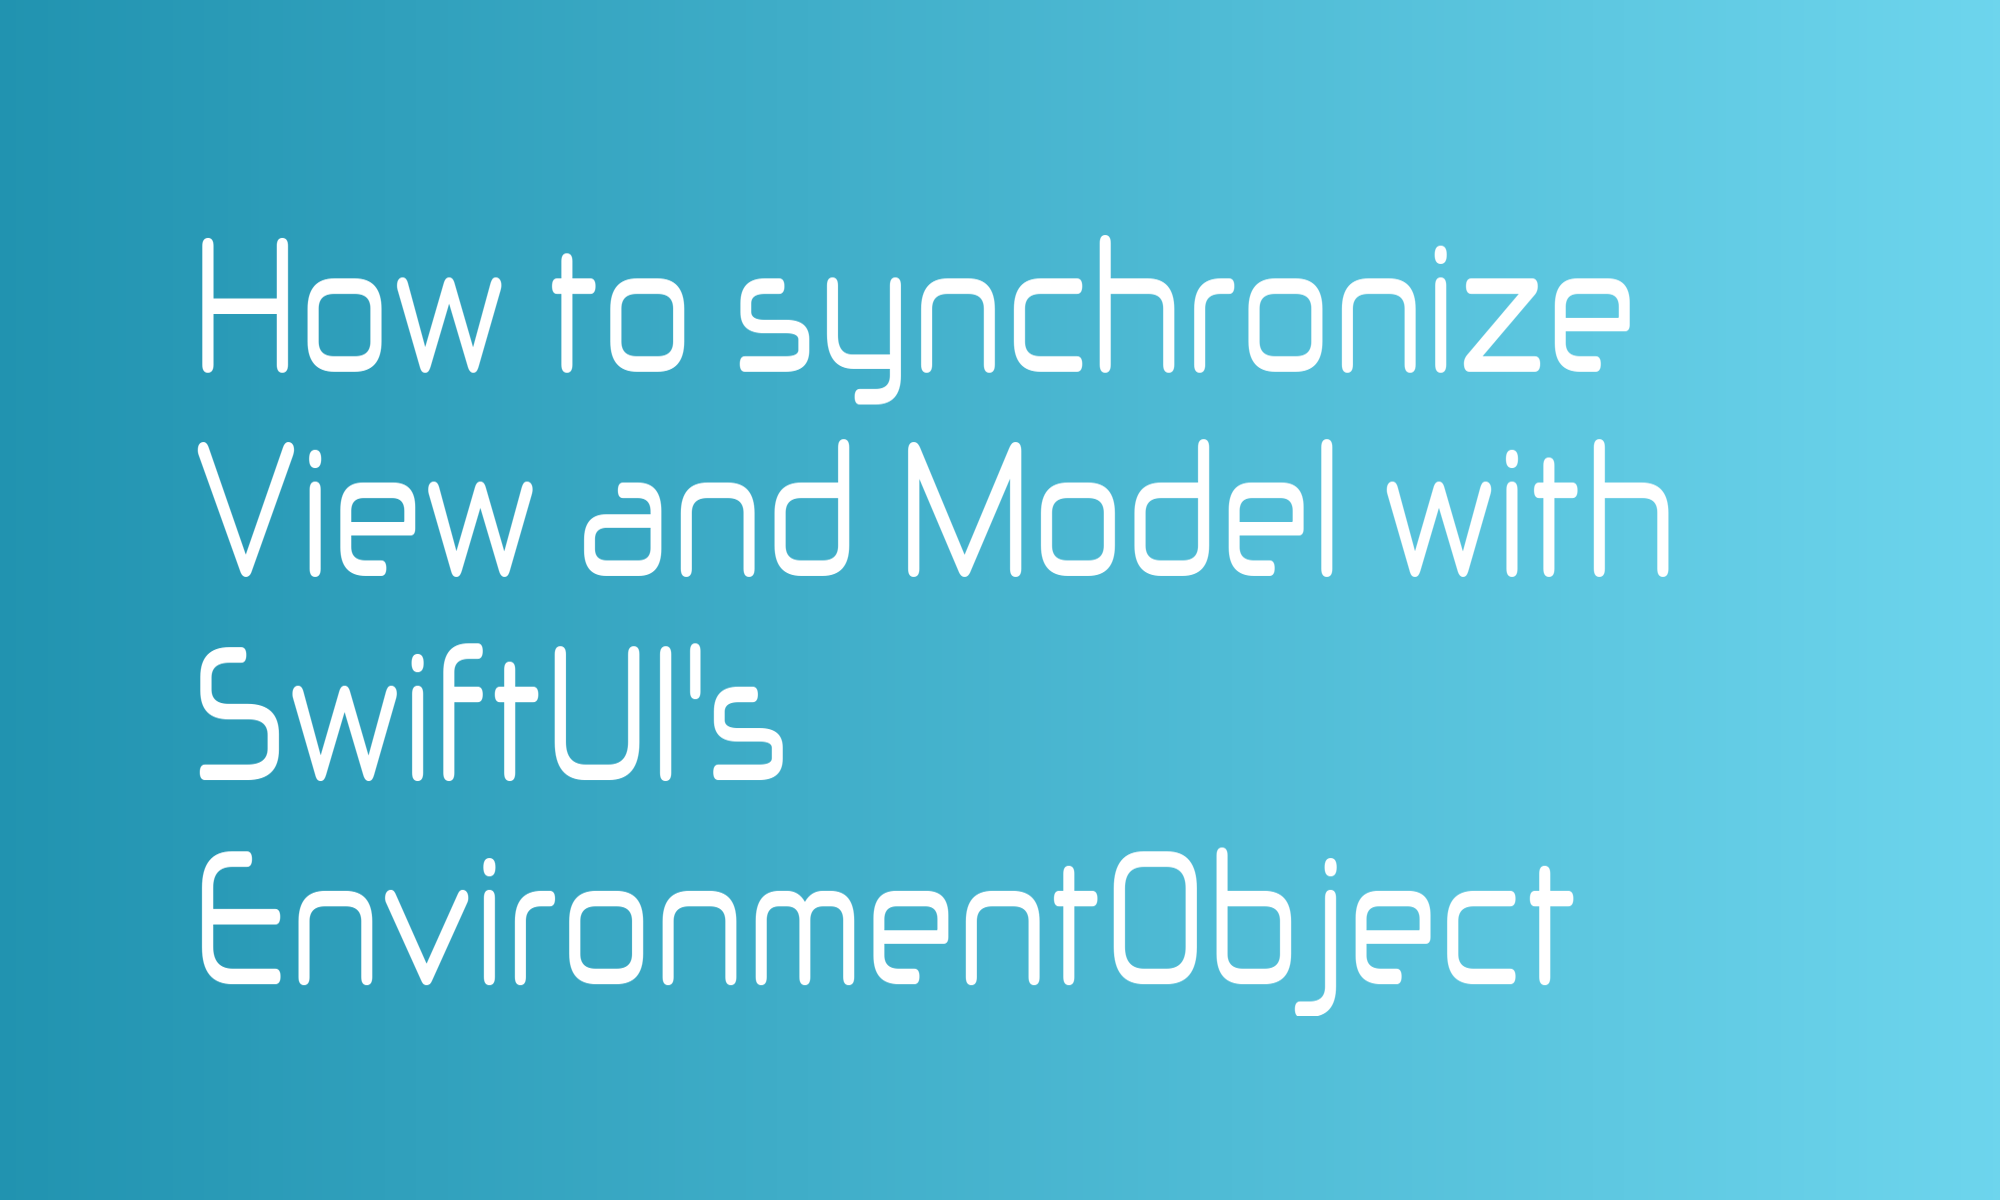 How to synchronize View and Model with SwiftUI's EnvironmentObject